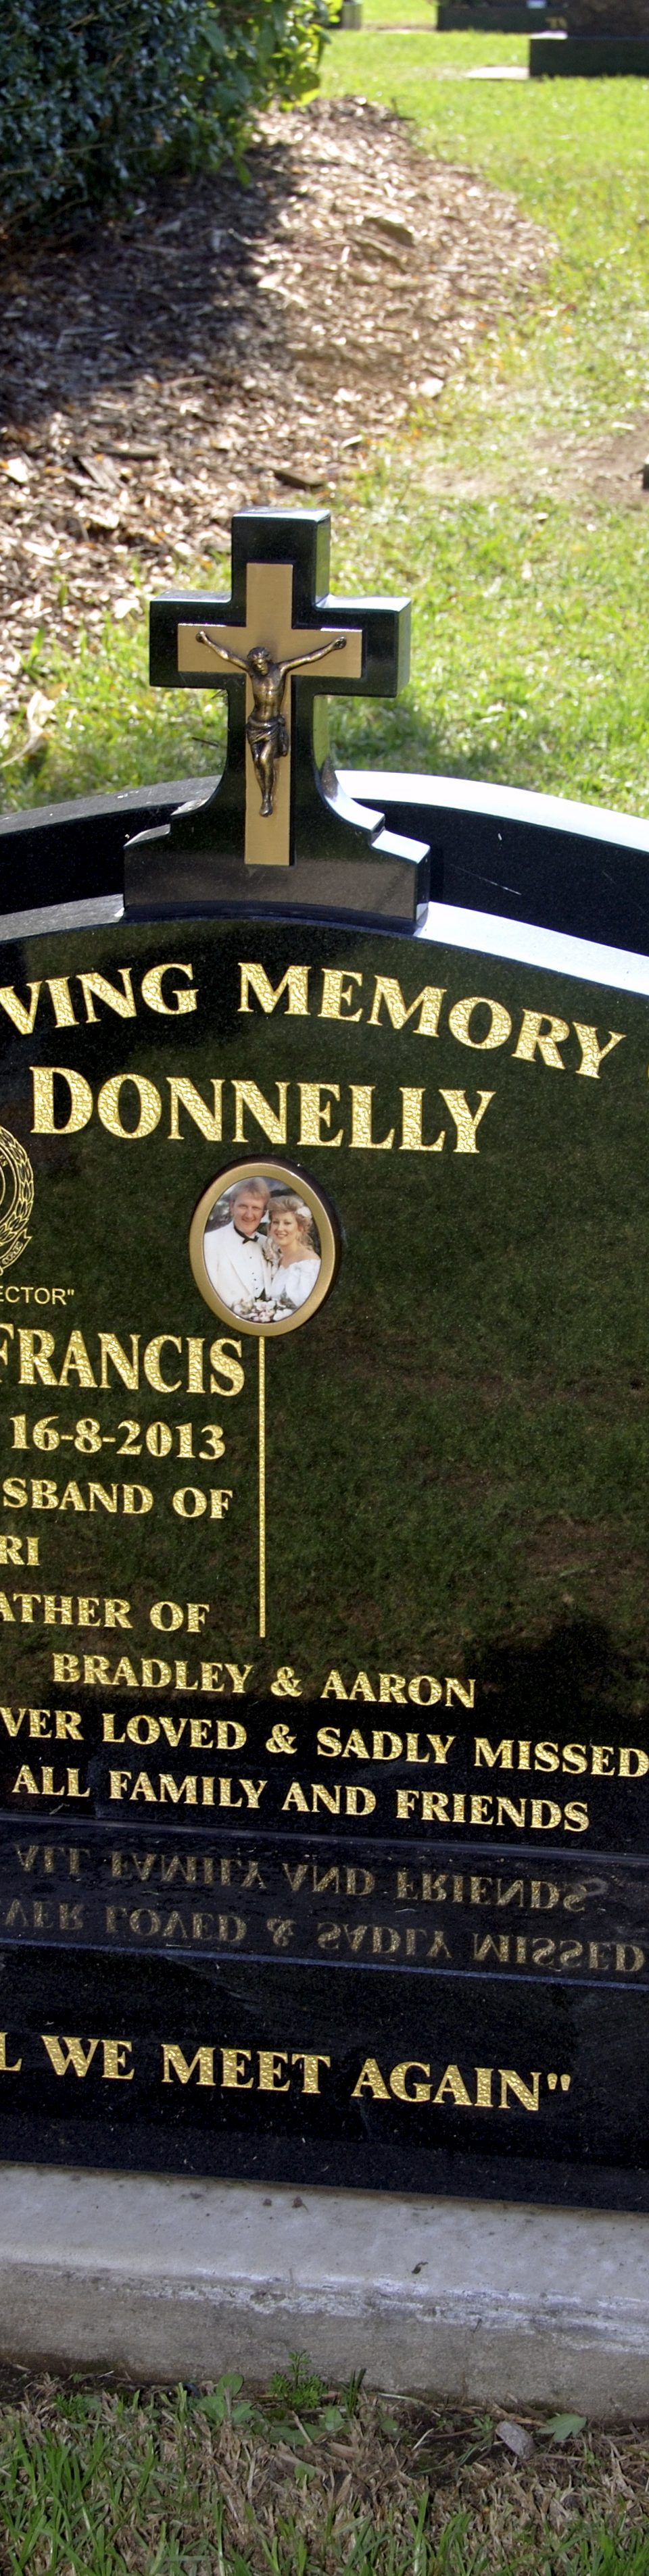 Graeme Donnelly - Grave. Inscription IN LOVING MEMORY OF DONNELLY GRAEME FRANCIS 8-9-1960 - 16-8-2013 BELOVED HUSBAND OF KERRI DEVOTED FATHER OF BRADLEY & AARON FOREVER LOVED & SADLY MISSED BY ALL FAMILY AND FRIENDS "TILL WE MEET AGAIN"